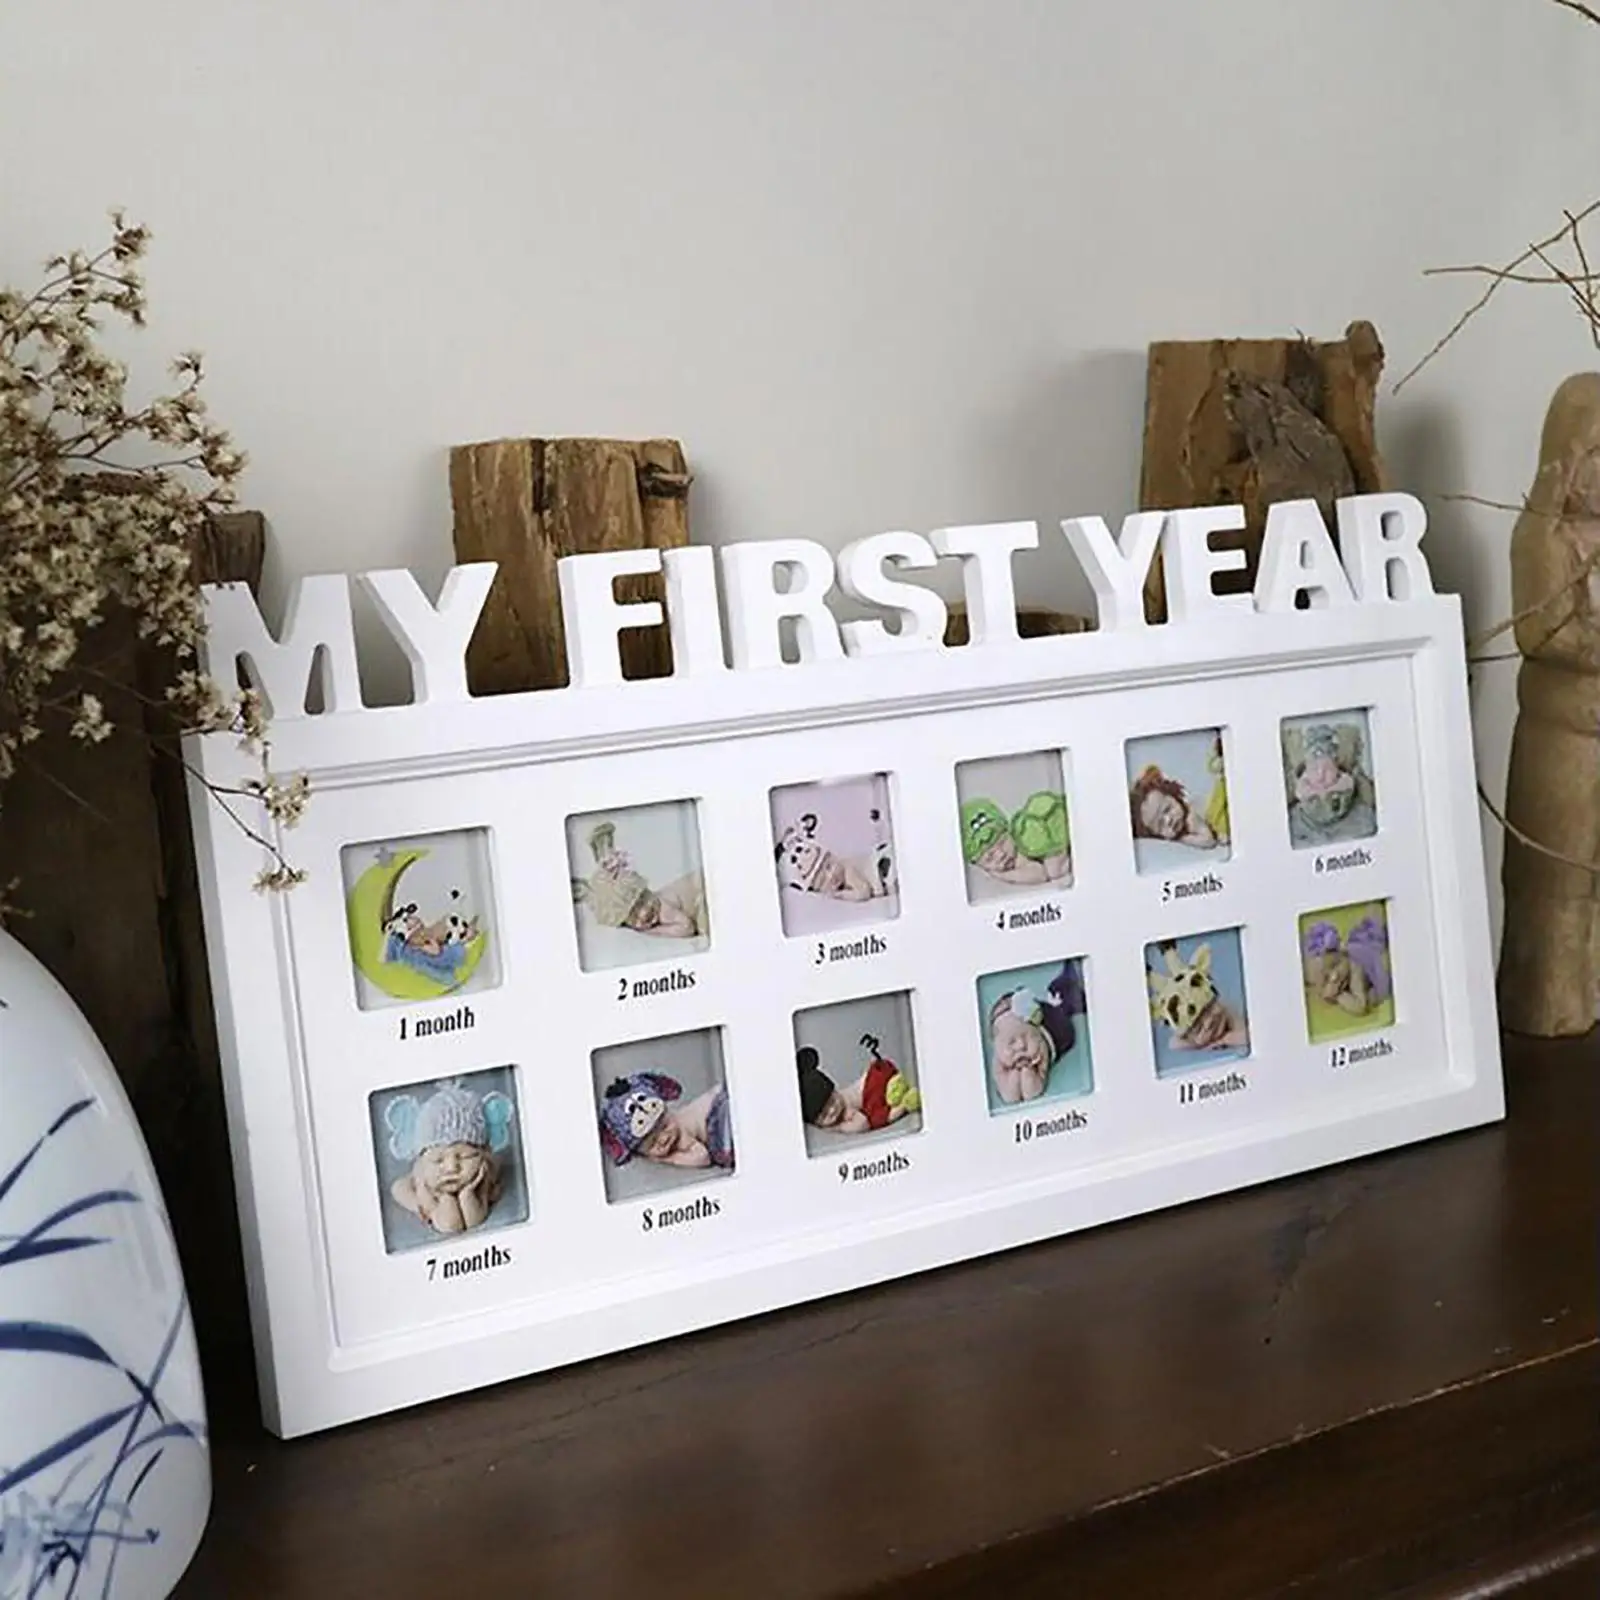 Baby Photo Frame Picture Frame Children My First Year Photo Frame